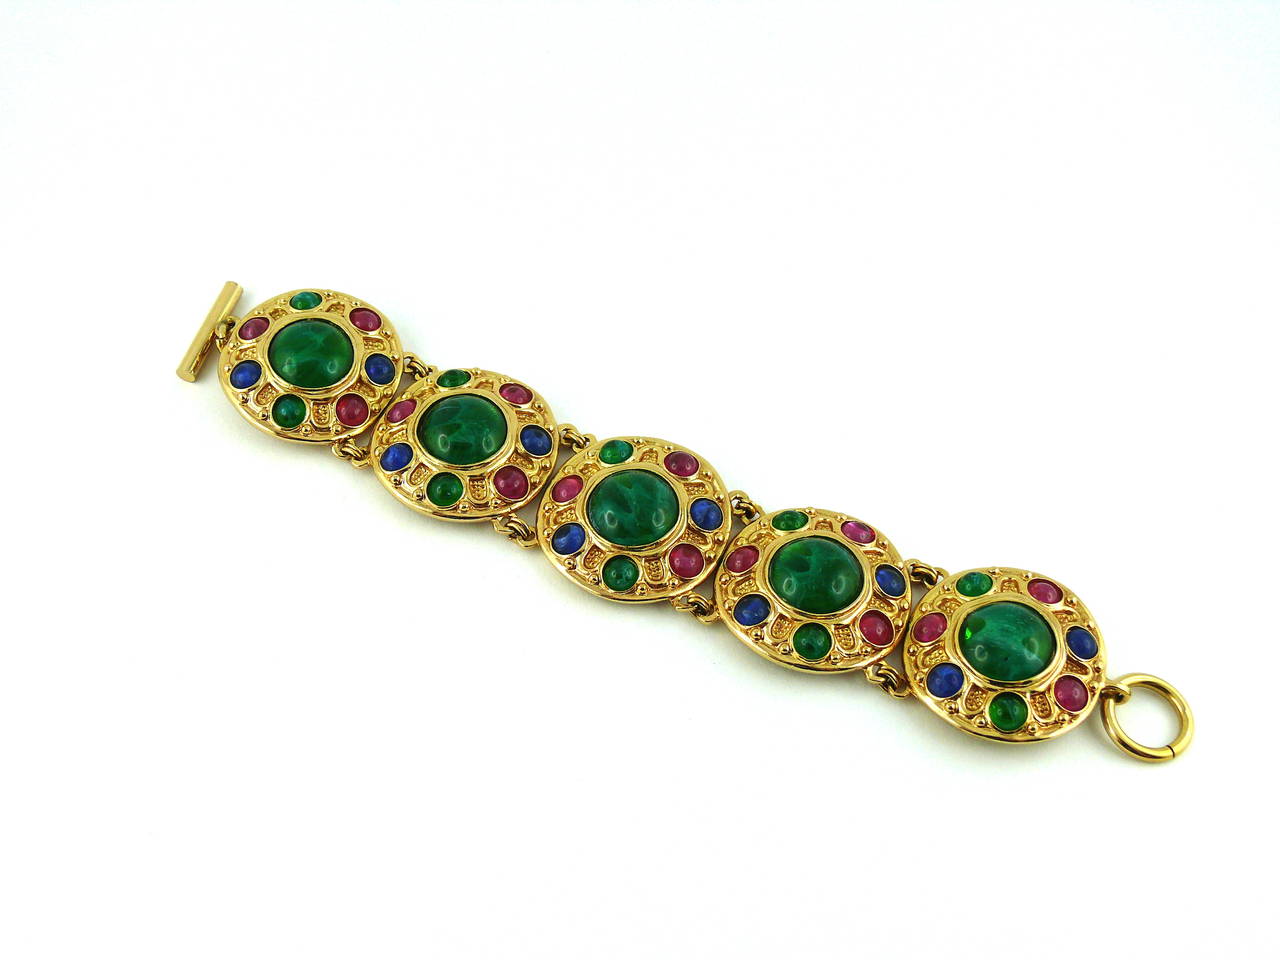 CHRISTIAN DIOR vintage Tutti Frutti gold toned link bracelet embellished with faux sapphire, emerald and ruby glass cabochons.

T bar closure.

Marked CHR. DIOR Germany.

Indicative measurements : length approx. 20.5 cm (8.07 inches) / link width